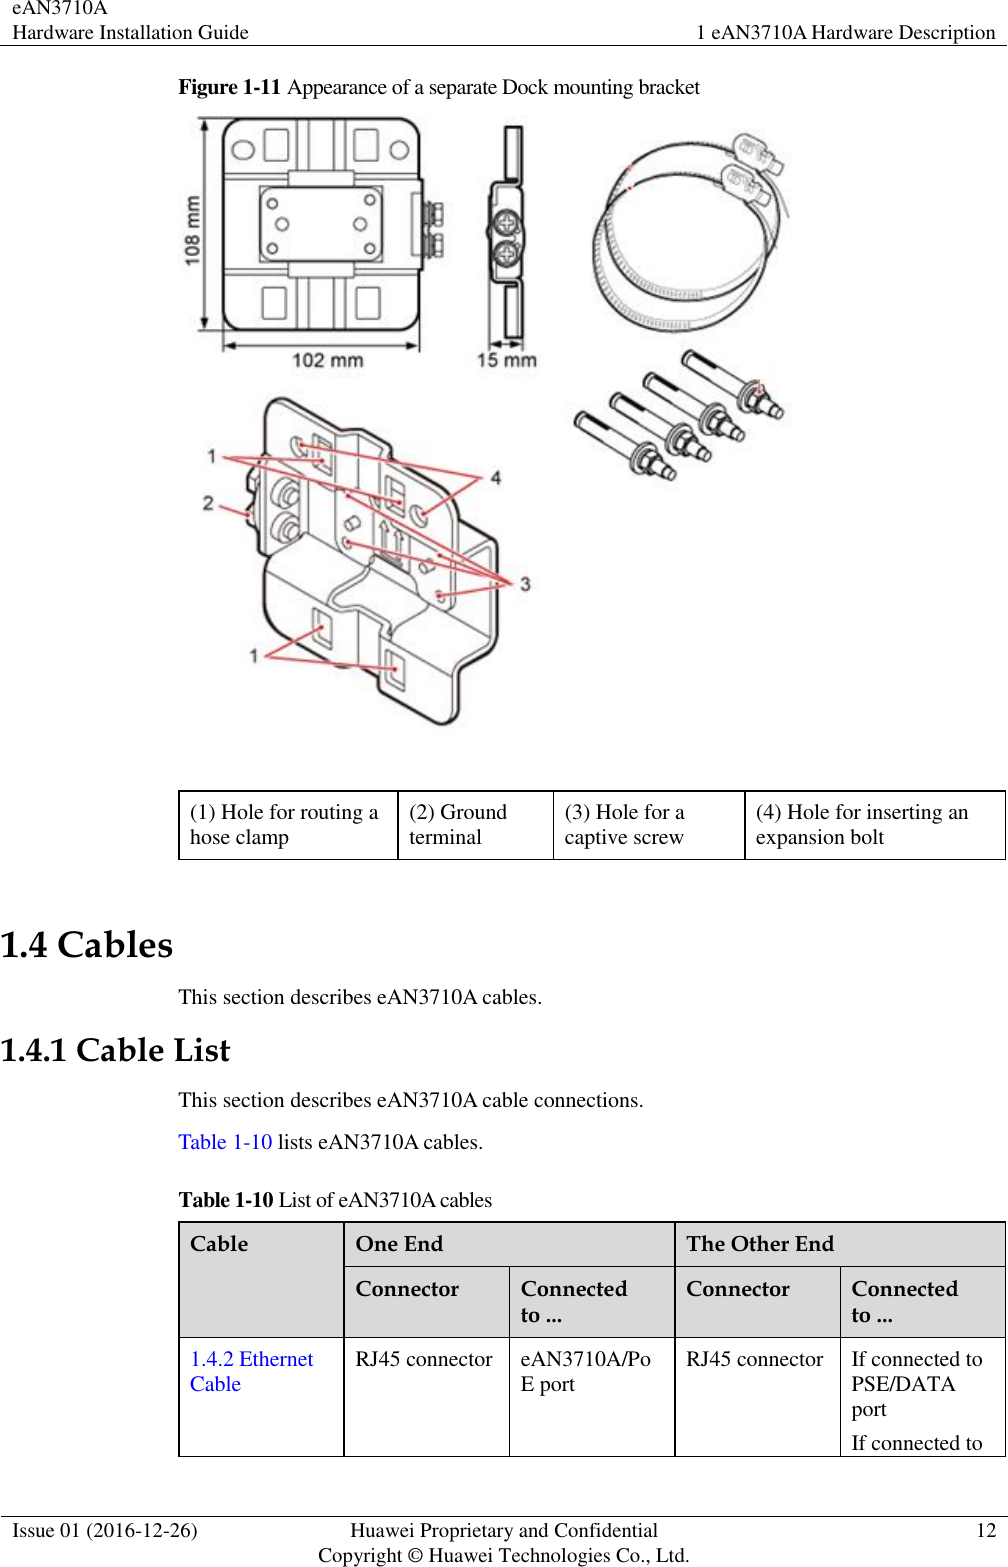 eAN3710A Hardware Installation Guide 1 eAN3710A Hardware Description  Issue 01 (2016-12-26) Huawei Proprietary and Confidential                                     Copyright © Huawei Technologies Co., Ltd. 12  Figure 1-11 Appearance of a separate Dock mounting bracket   (1) Hole for routing a hose clamp (2) Ground terminal (3) Hole for a captive screw (4) Hole for inserting an expansion bolt 1.4 Cables This section describes eAN3710A cables. 1.4.1 Cable List This section describes eAN3710A cable connections. Table 1-10 lists eAN3710A cables. Table 1-10 List of eAN3710A cables Cable One End The Other End Connector Connected to ... Connector Connected to ... 1.4.2 Ethernet Cable RJ45 connector eAN3710A/PoE port RJ45 connector If connected to PSE/DATA port If connected to 